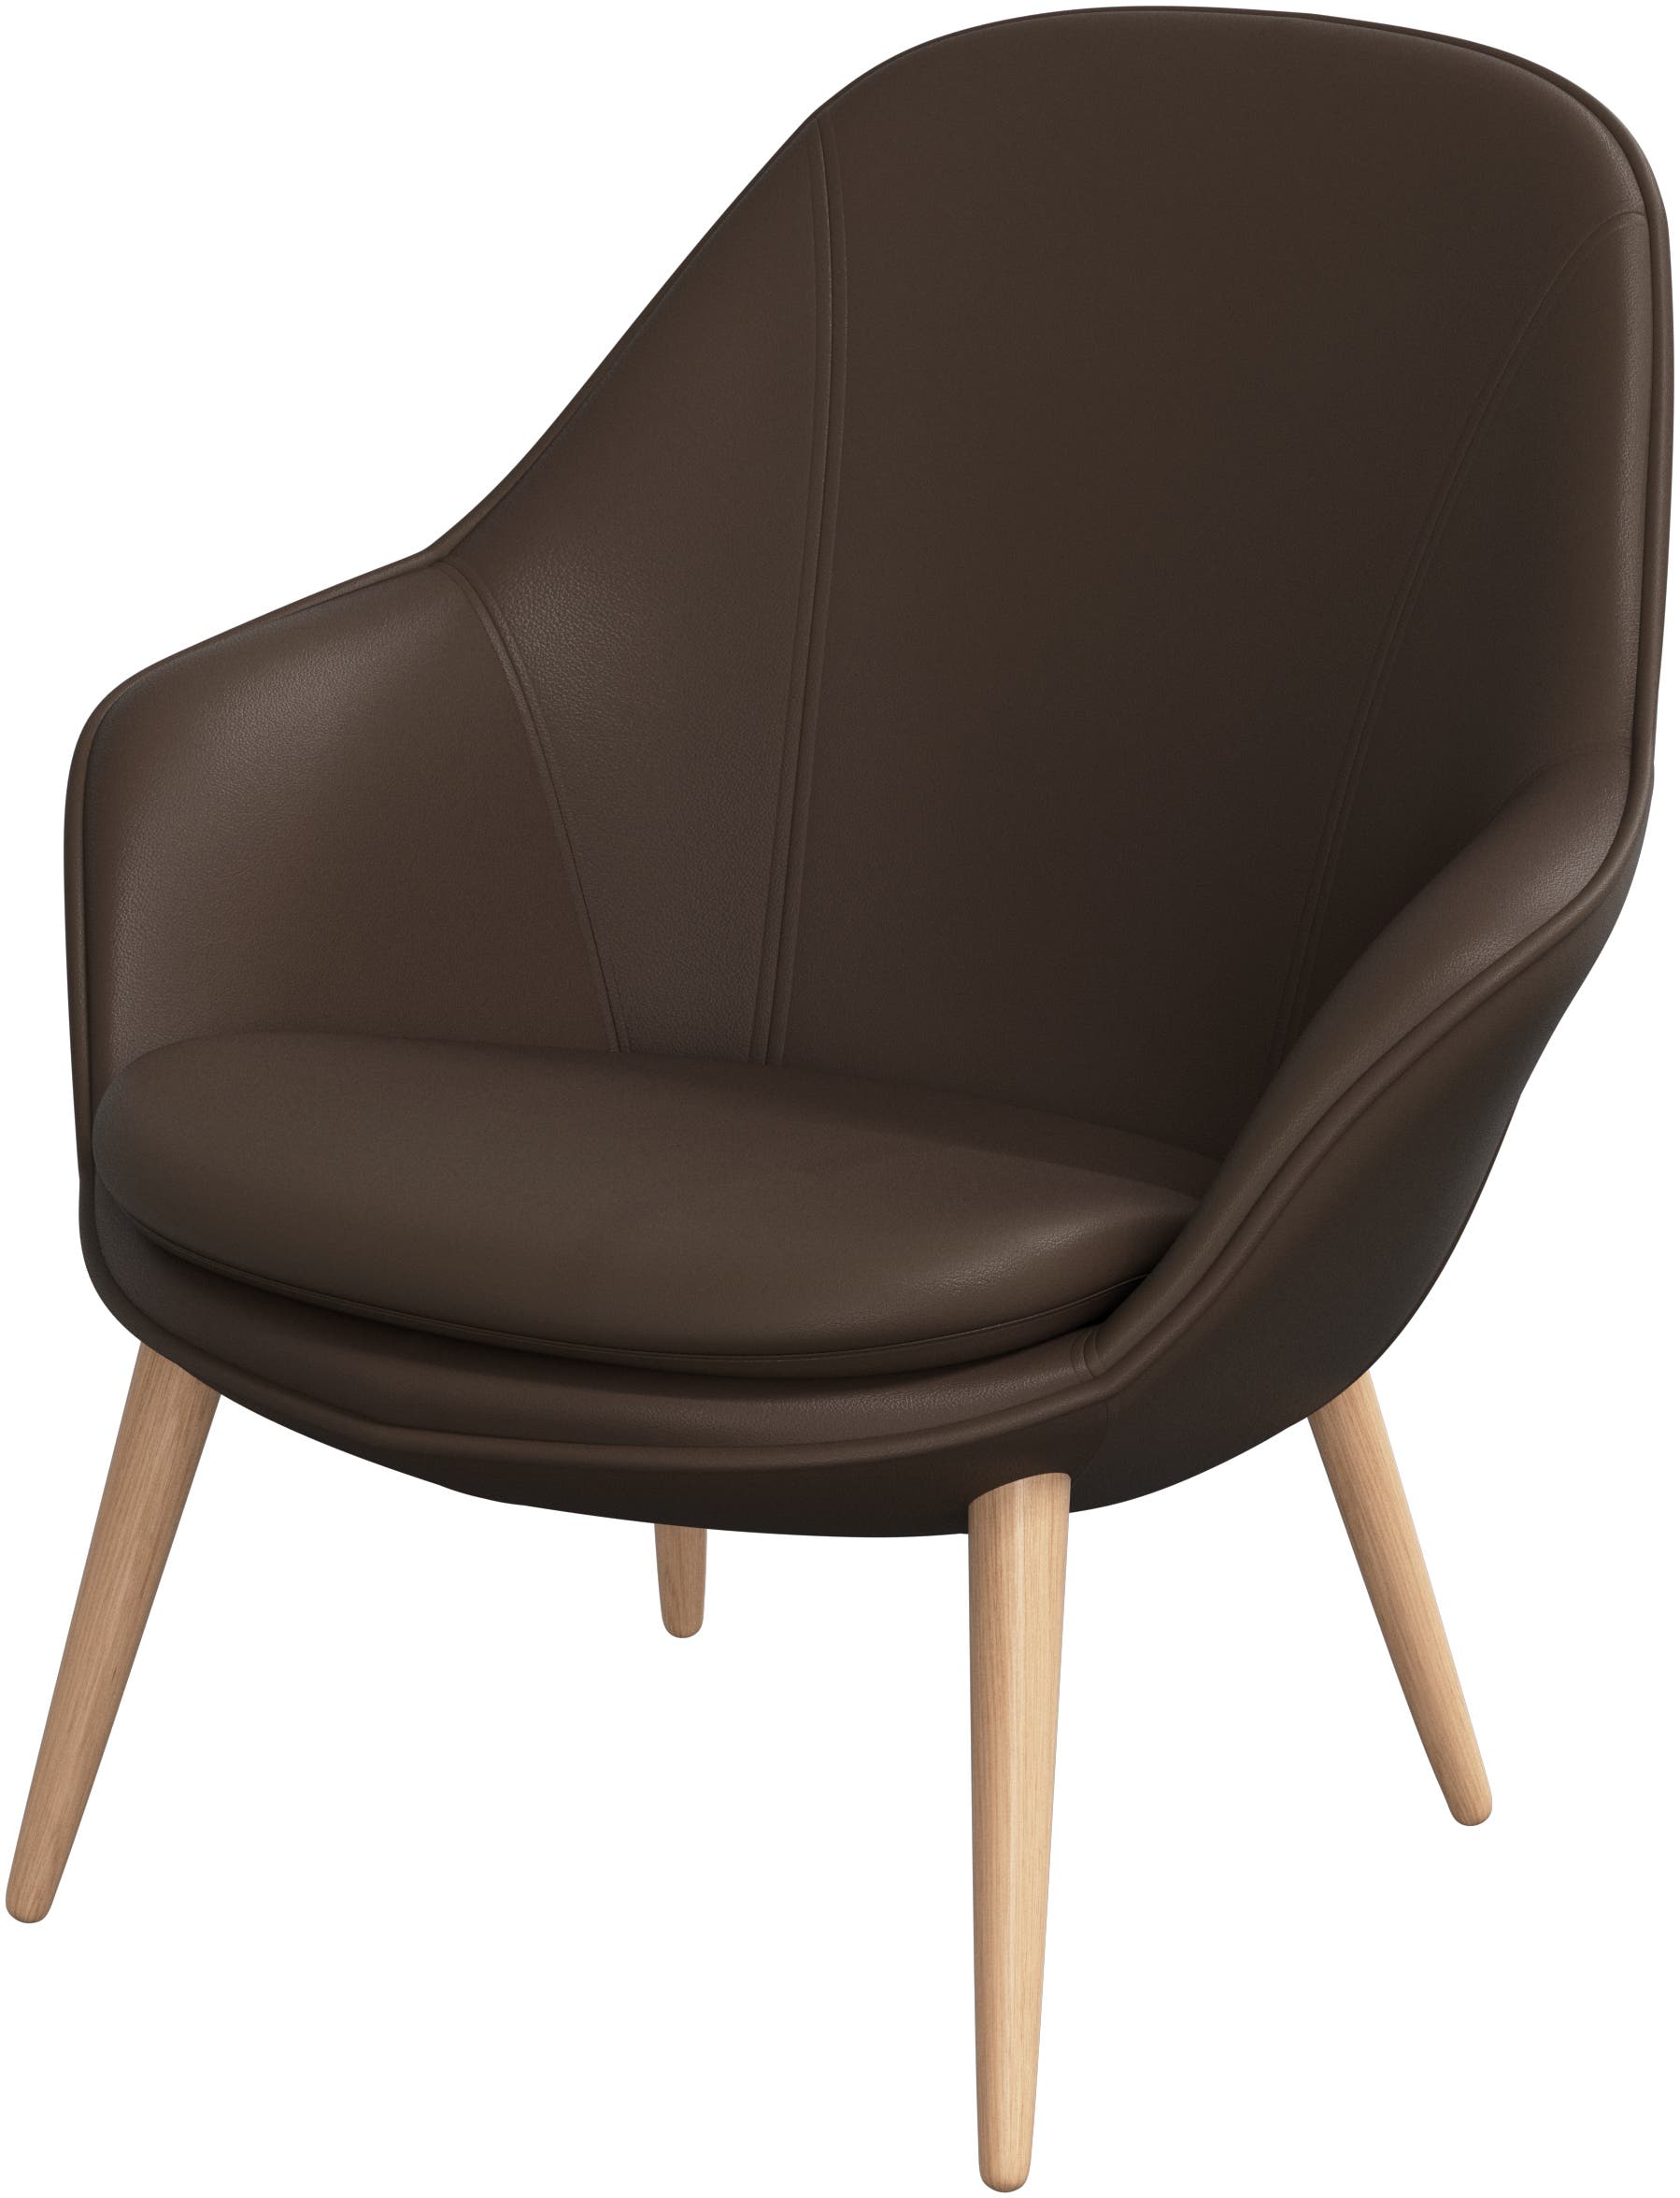 Adelaide living chair